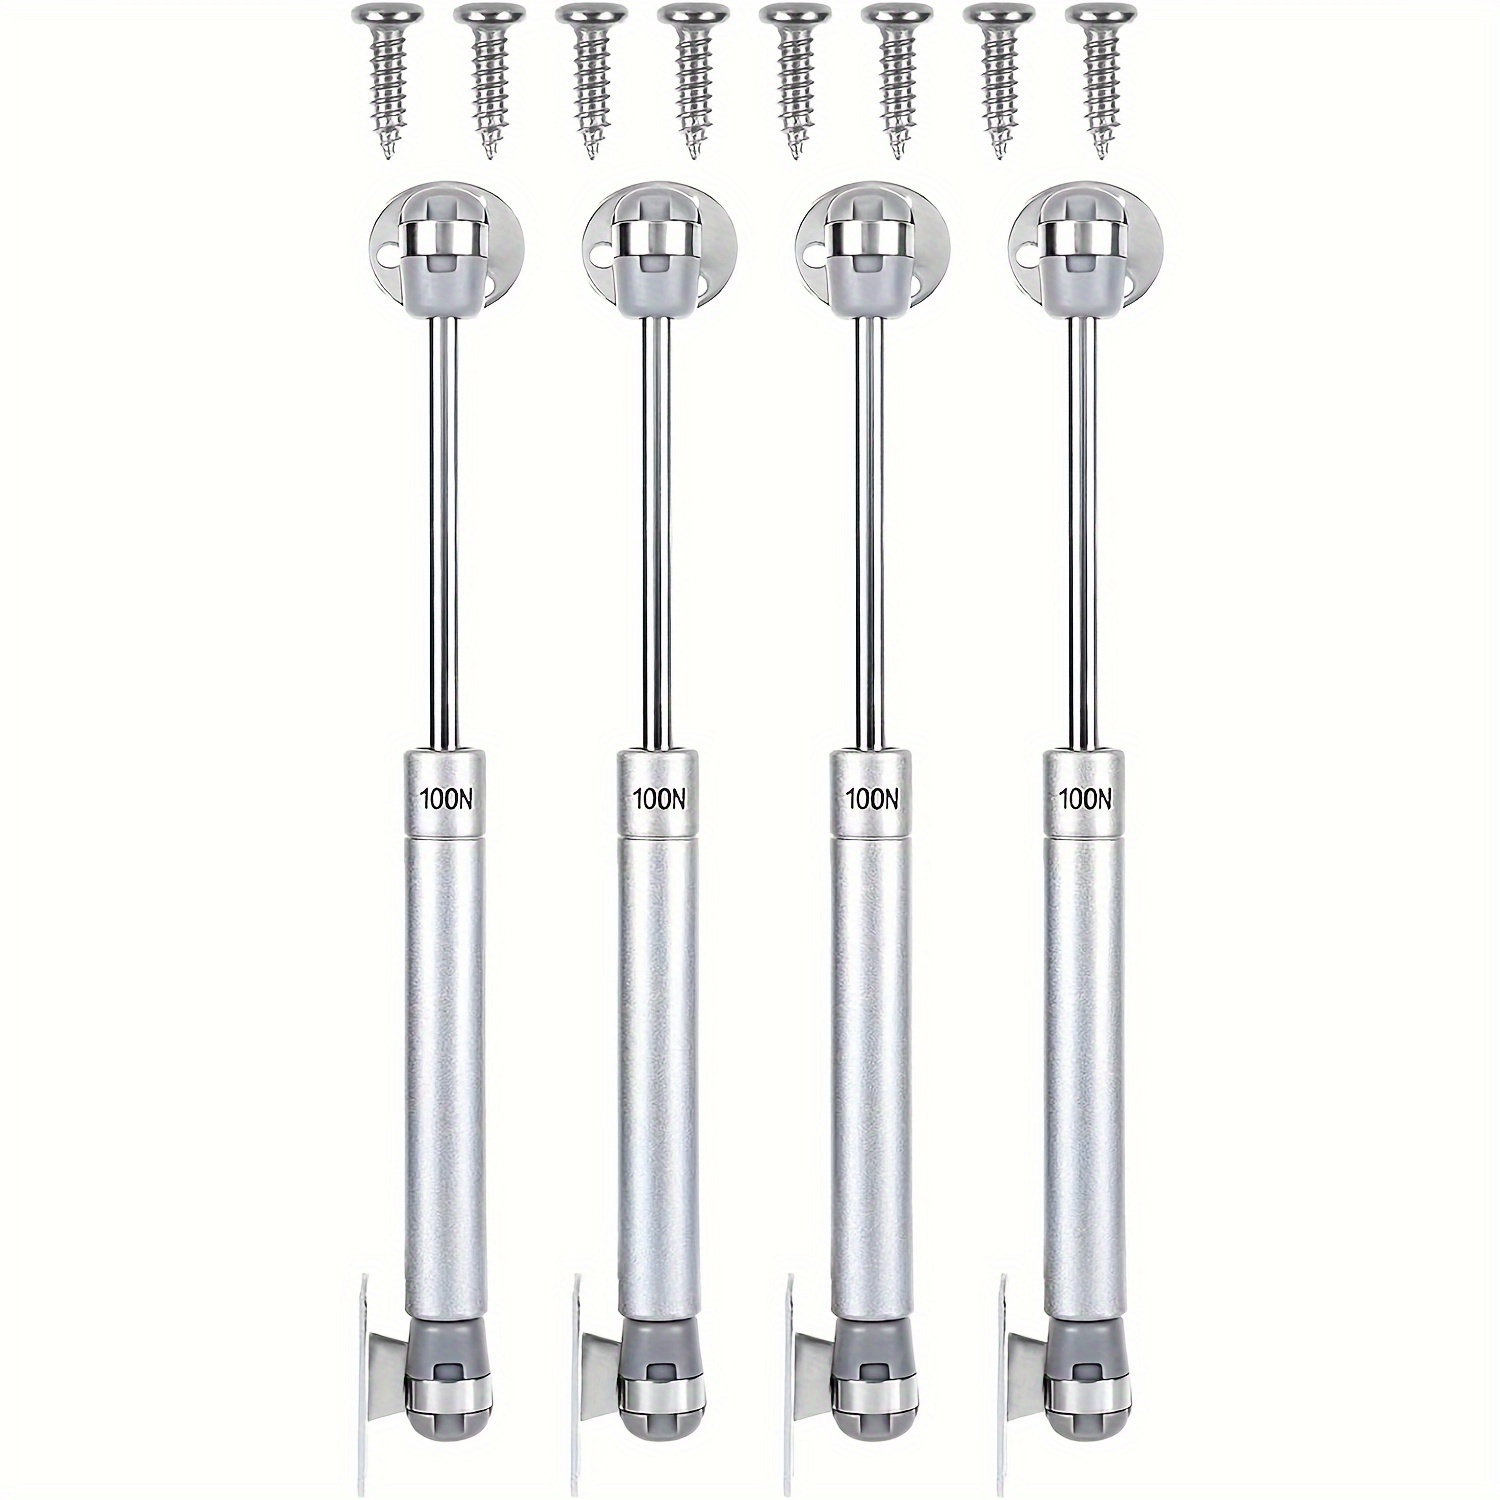 

4-pack 10" Hydraulic Gas Spring Lift Support Struts For Cabinets, Modern Style 100n/22.5lbs Soft Open Door Support Rods With Silver Metal And Plastic Door Mount Hinges